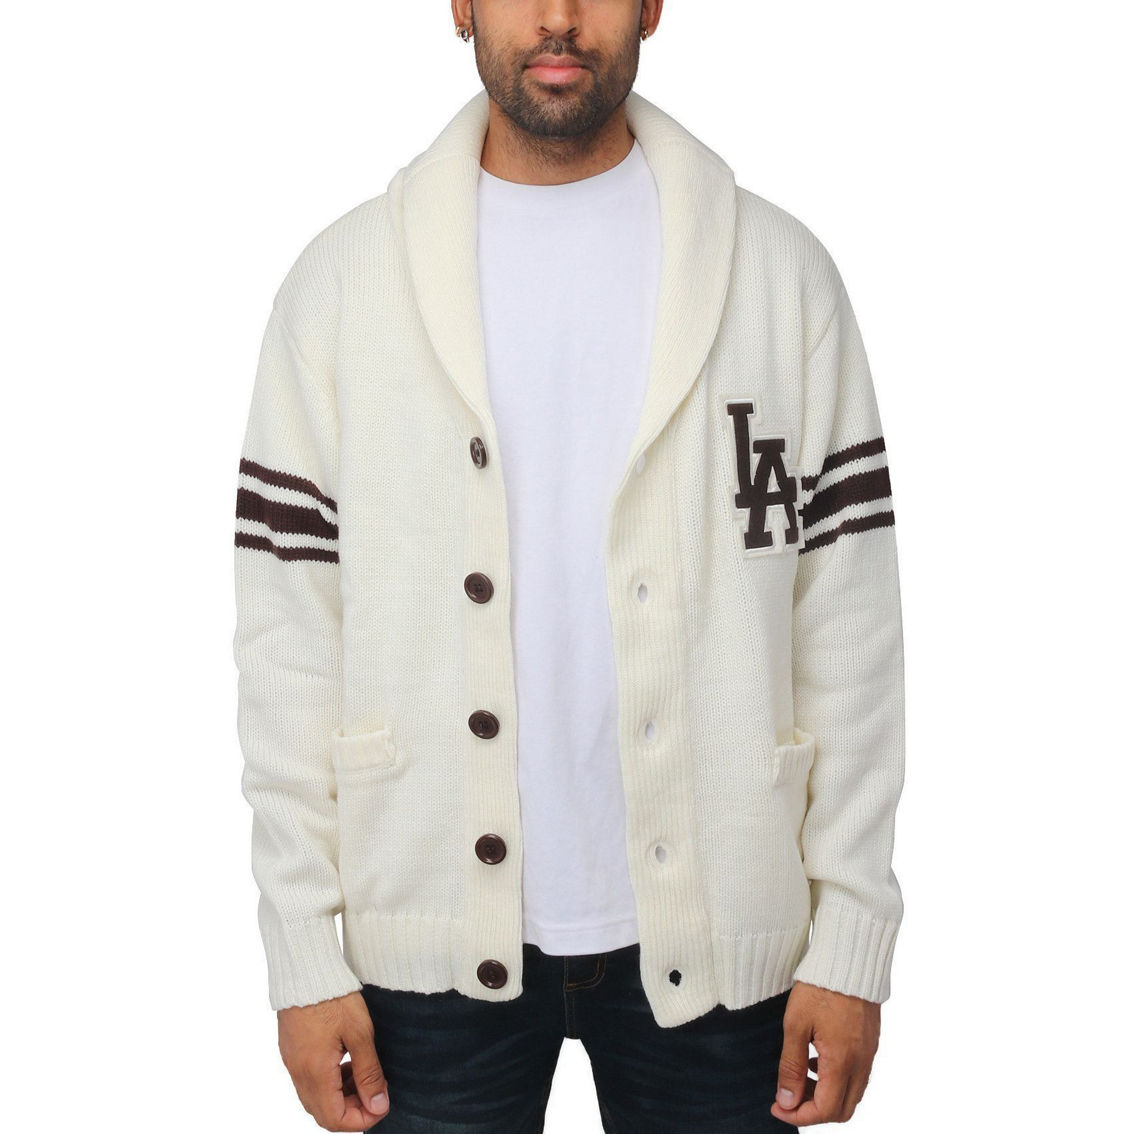 Men's Shawl Collar Heavy Gauge Cardigan with City Patch - Image 3 of 3